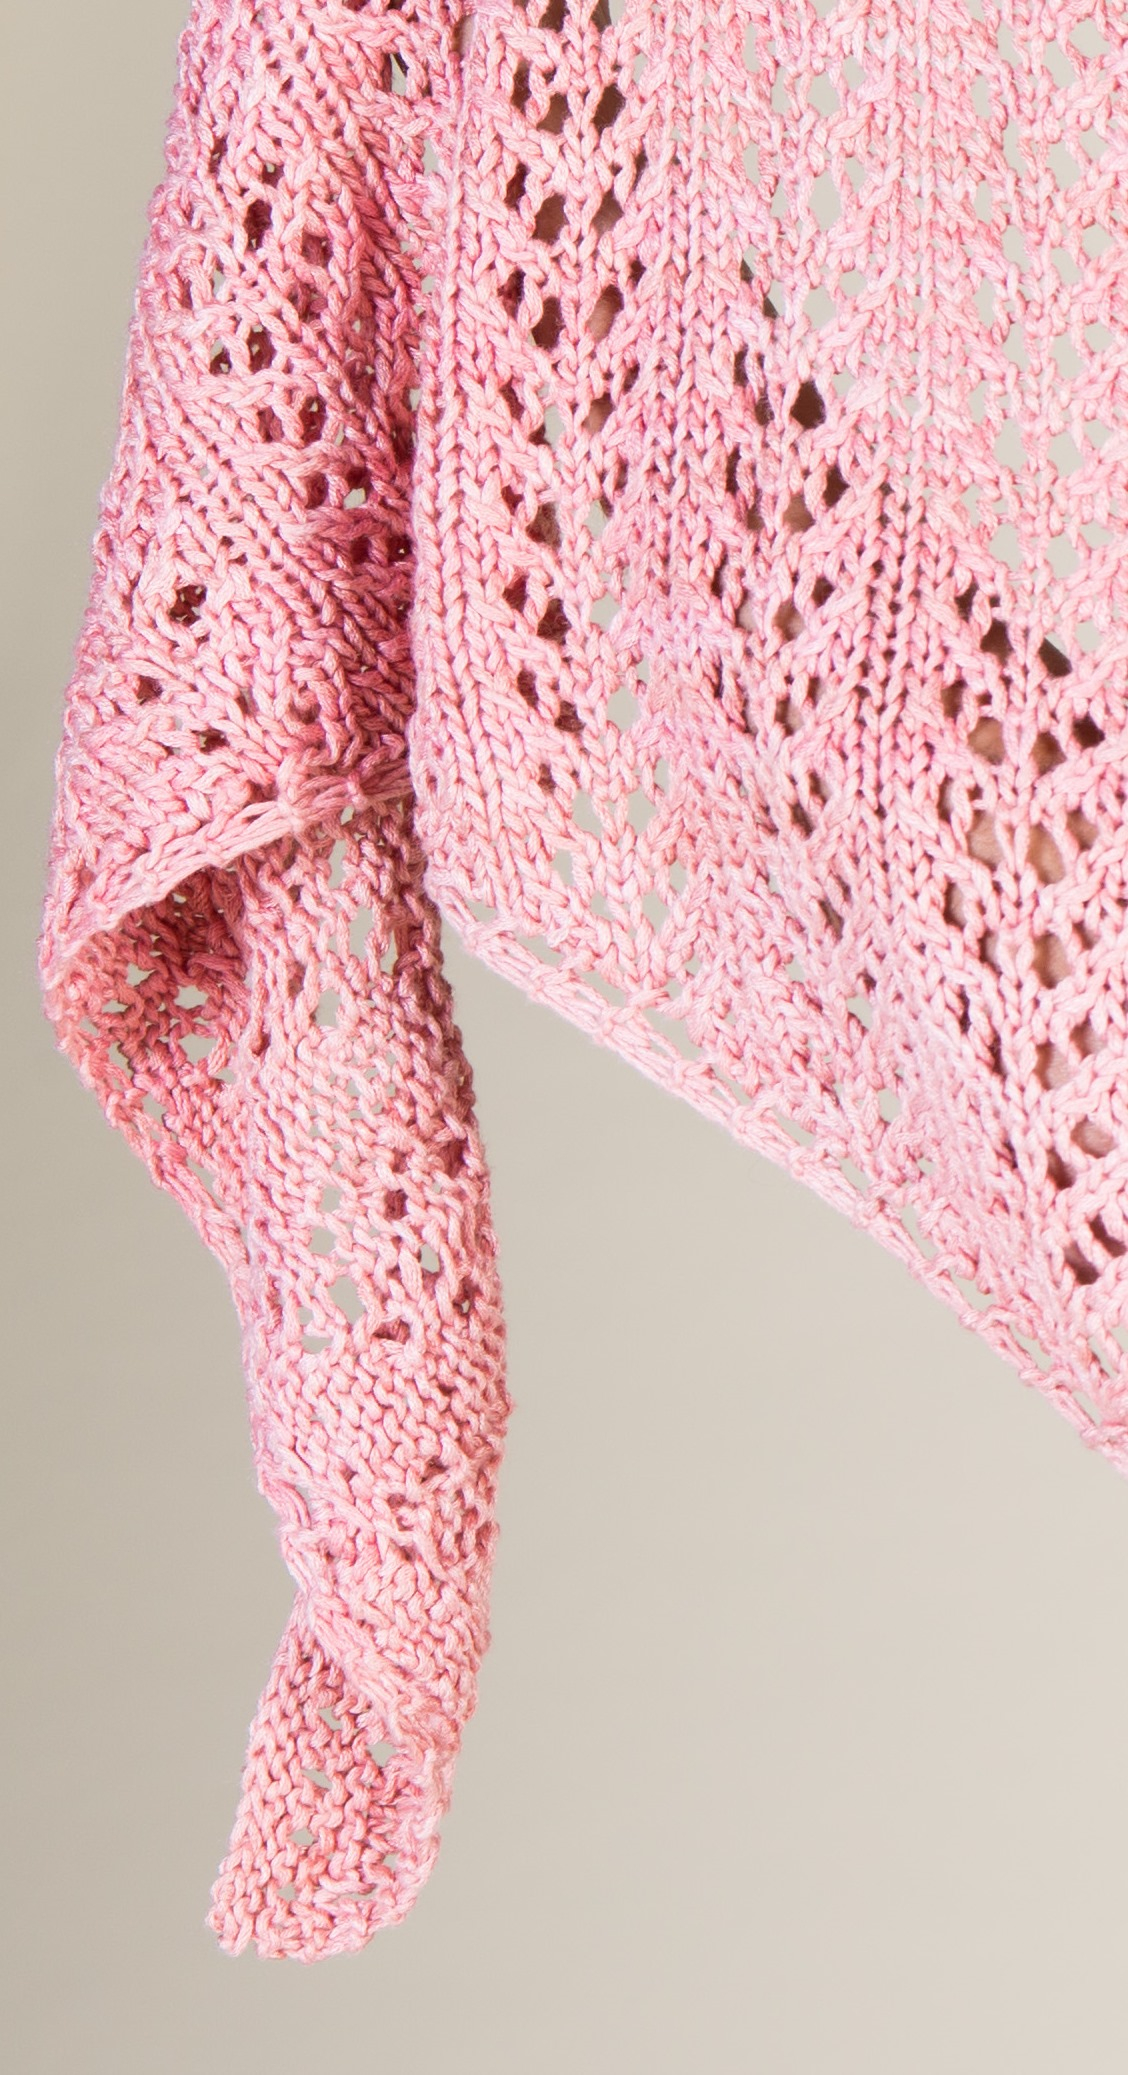 Knitted Lace Pattern An Easy Lace Knitting Pattern The Sausalito Shawl Interweave